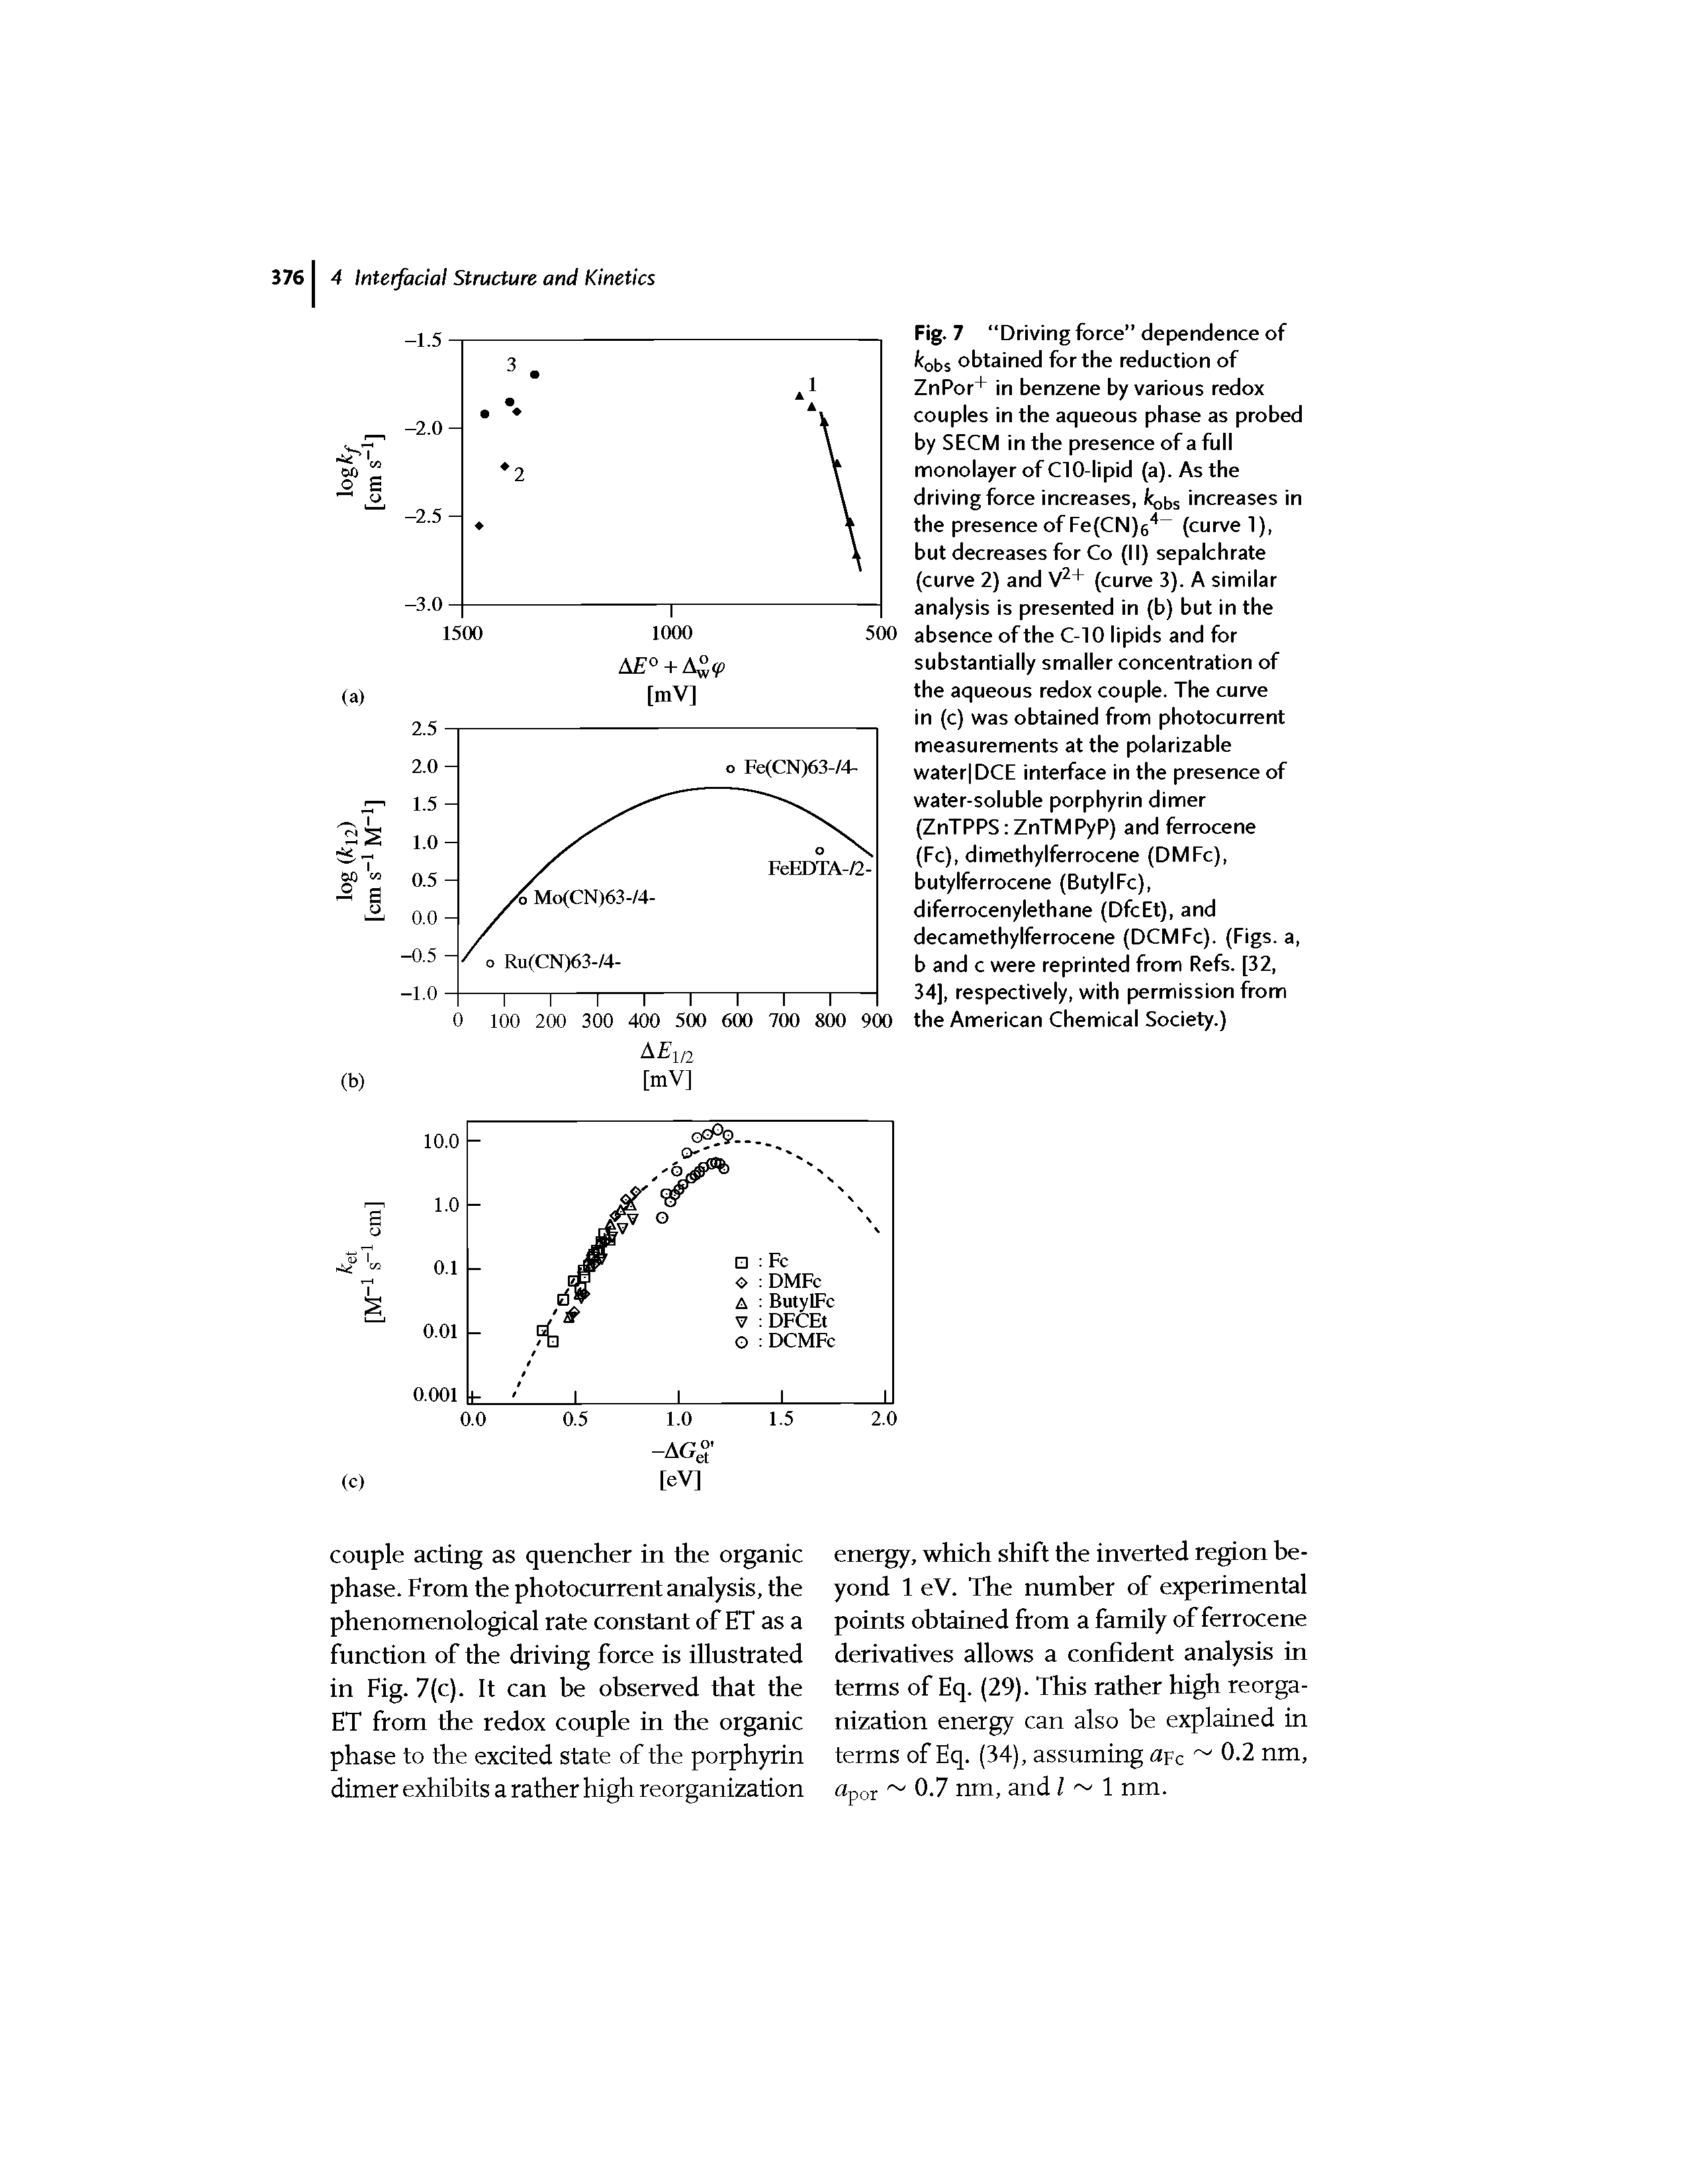 Fig. 7 Driving force dependence of (fobs obtained for the reduction of ZnPor+ in benzene by various redox couples in the aqueous phase as probed by SECM in the presence of a full monolayer of ClO-lipid (a). As the driving force increases, fcobs increases in the presence of Fe(CN)6 (curve 1), but decreases for Co (II) sepalchrate (curve 2) and V + (curve 3). A similar analysis is presented in (b) but in the absence of the C-10 lipids and for substantially smaller concentration of the aqueous redox couple. The curve in (c) was obtained from photocurrent measurements at the polarizable water DCE interface in the presence of water-soluble porphyrin dimer (ZnTPPSiZnTMFVP) and ferrocene (Fc), dimethylferrocene (DMFc), butylferrocene (ButylFc), diferrocenylethane (DfcEt), and decamethylferrocene (DCMFc). (Figs, a, b and c were reprinted from Refs. [32, 34], respectively, with permission from the American Chemical Society.)...